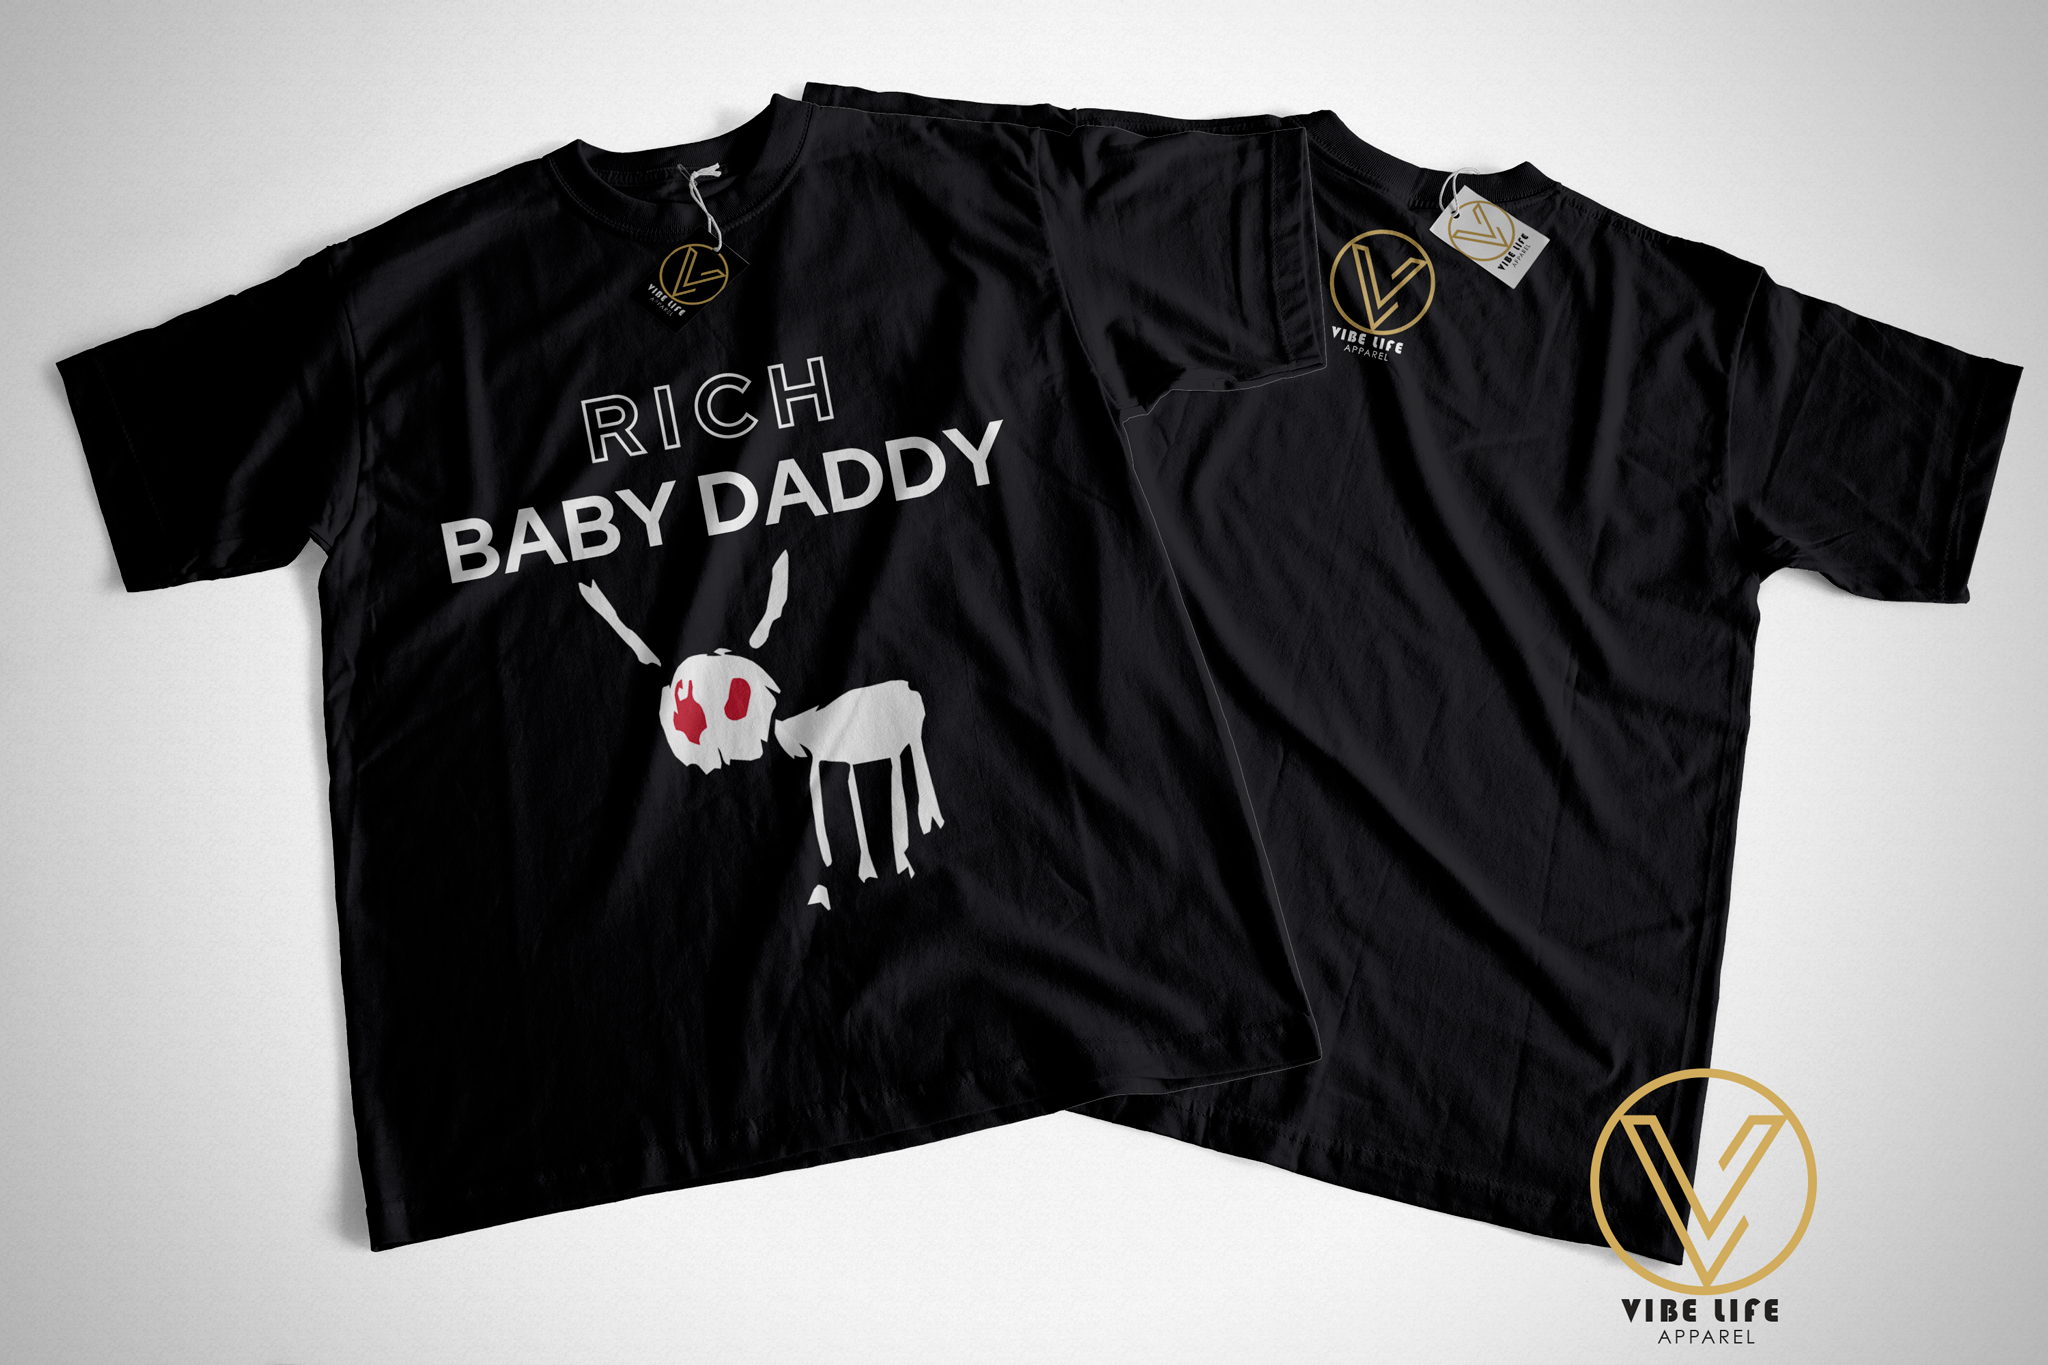 RICH - BABY DADDY Unisex Adult Tee